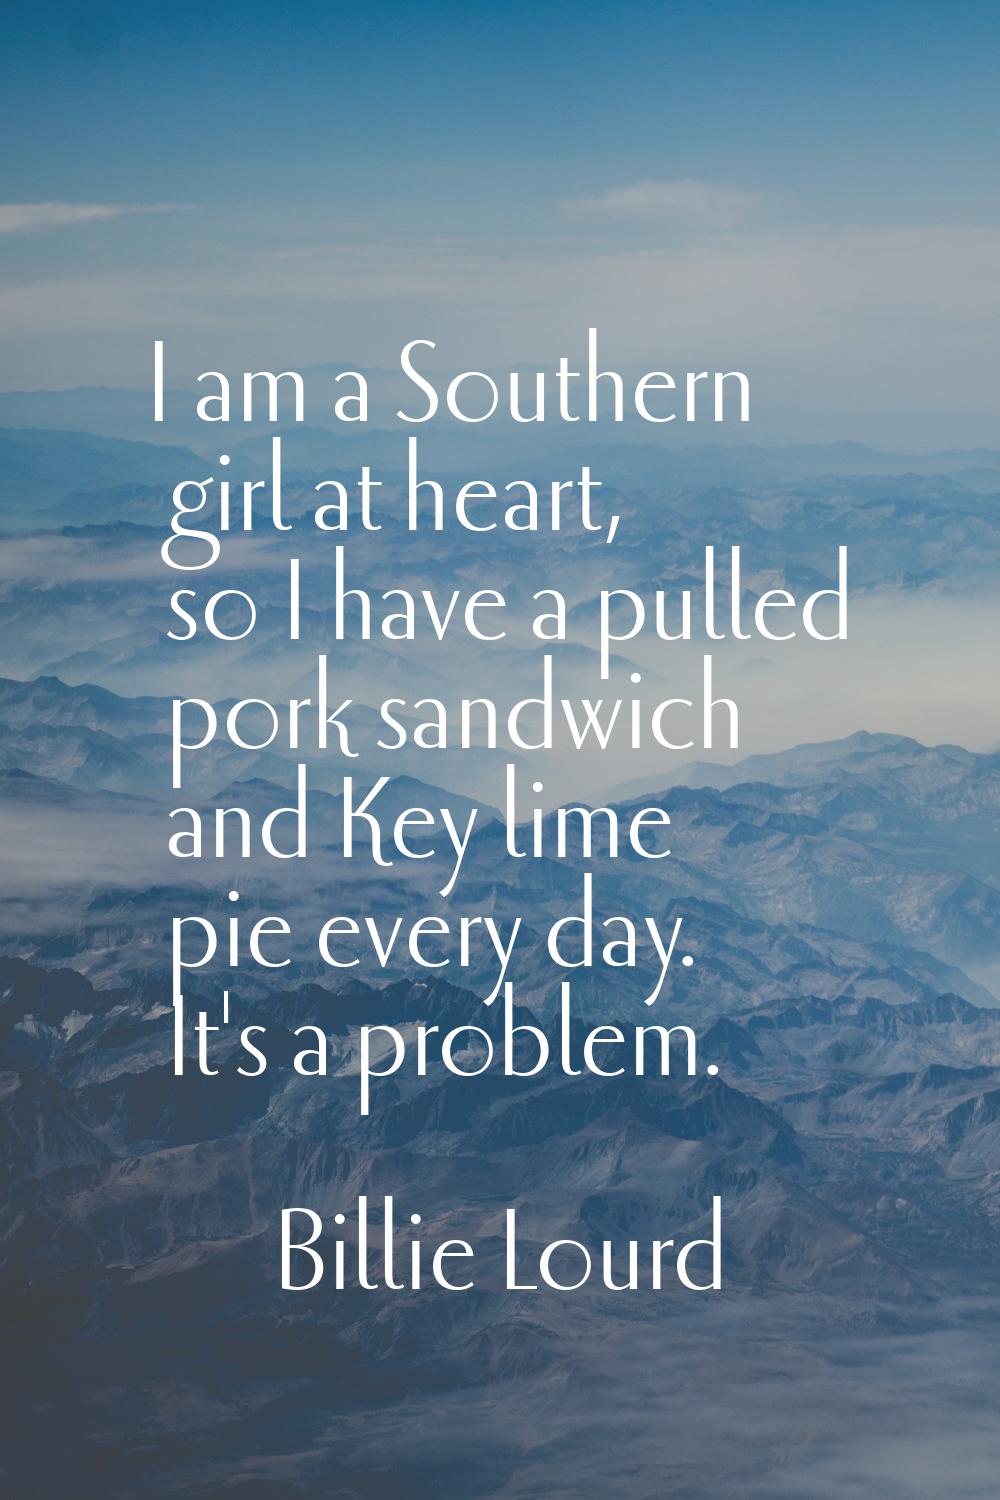 I am a Southern girl at heart, so I have a pulled pork sandwich and Key lime pie every day. It's a 